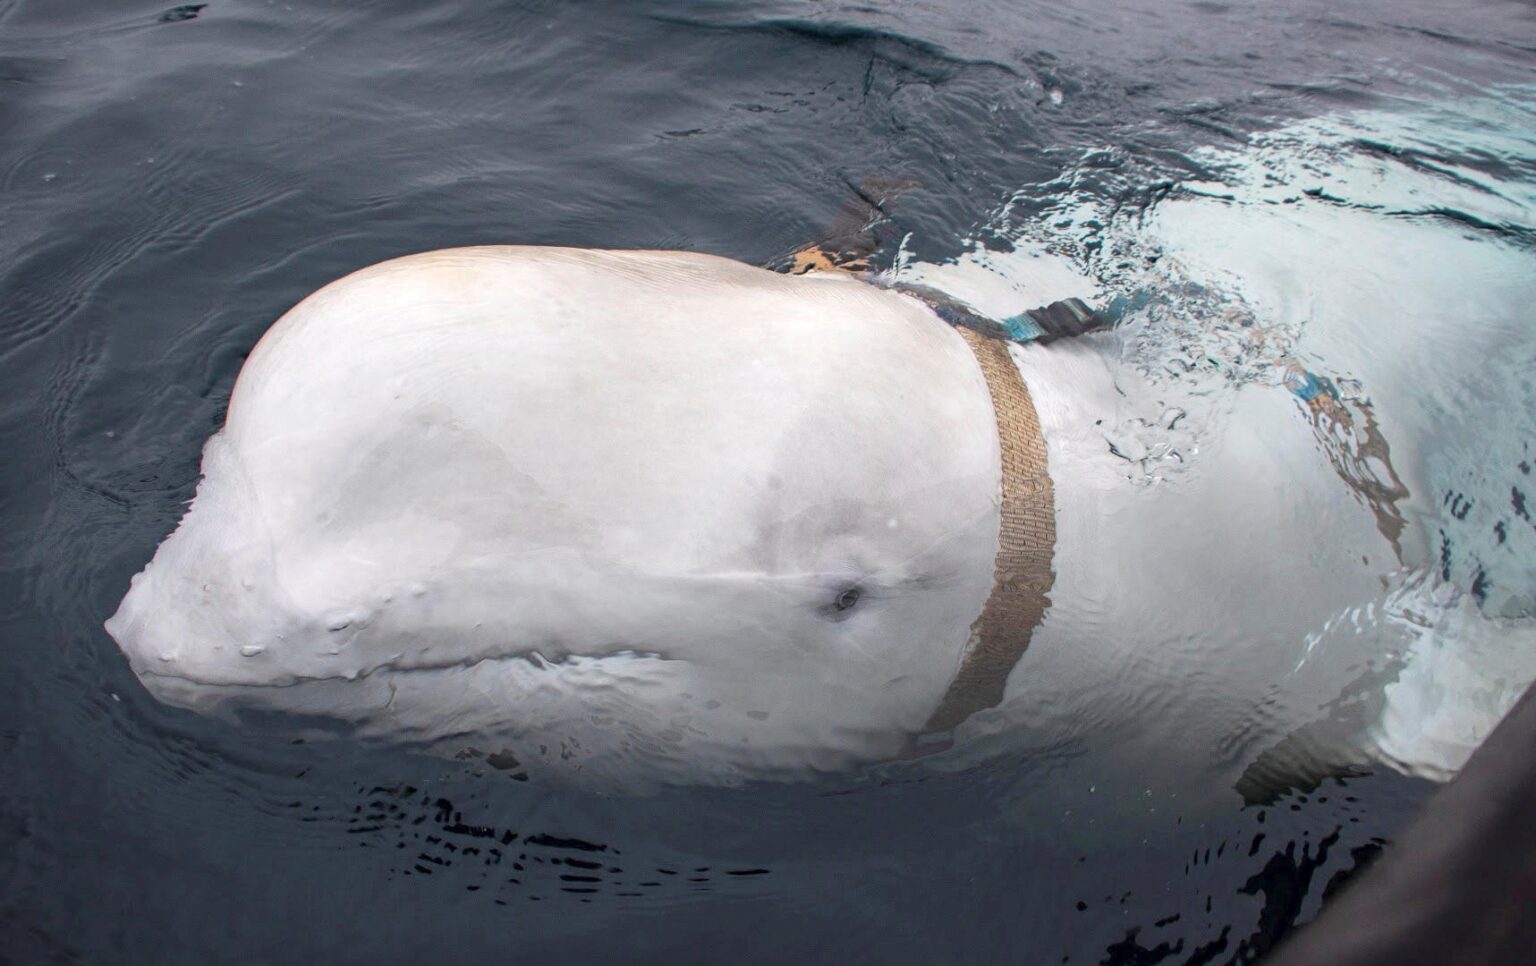 Russian ‘spy whale’ Hvaldimir spotted off the coast of Sweden